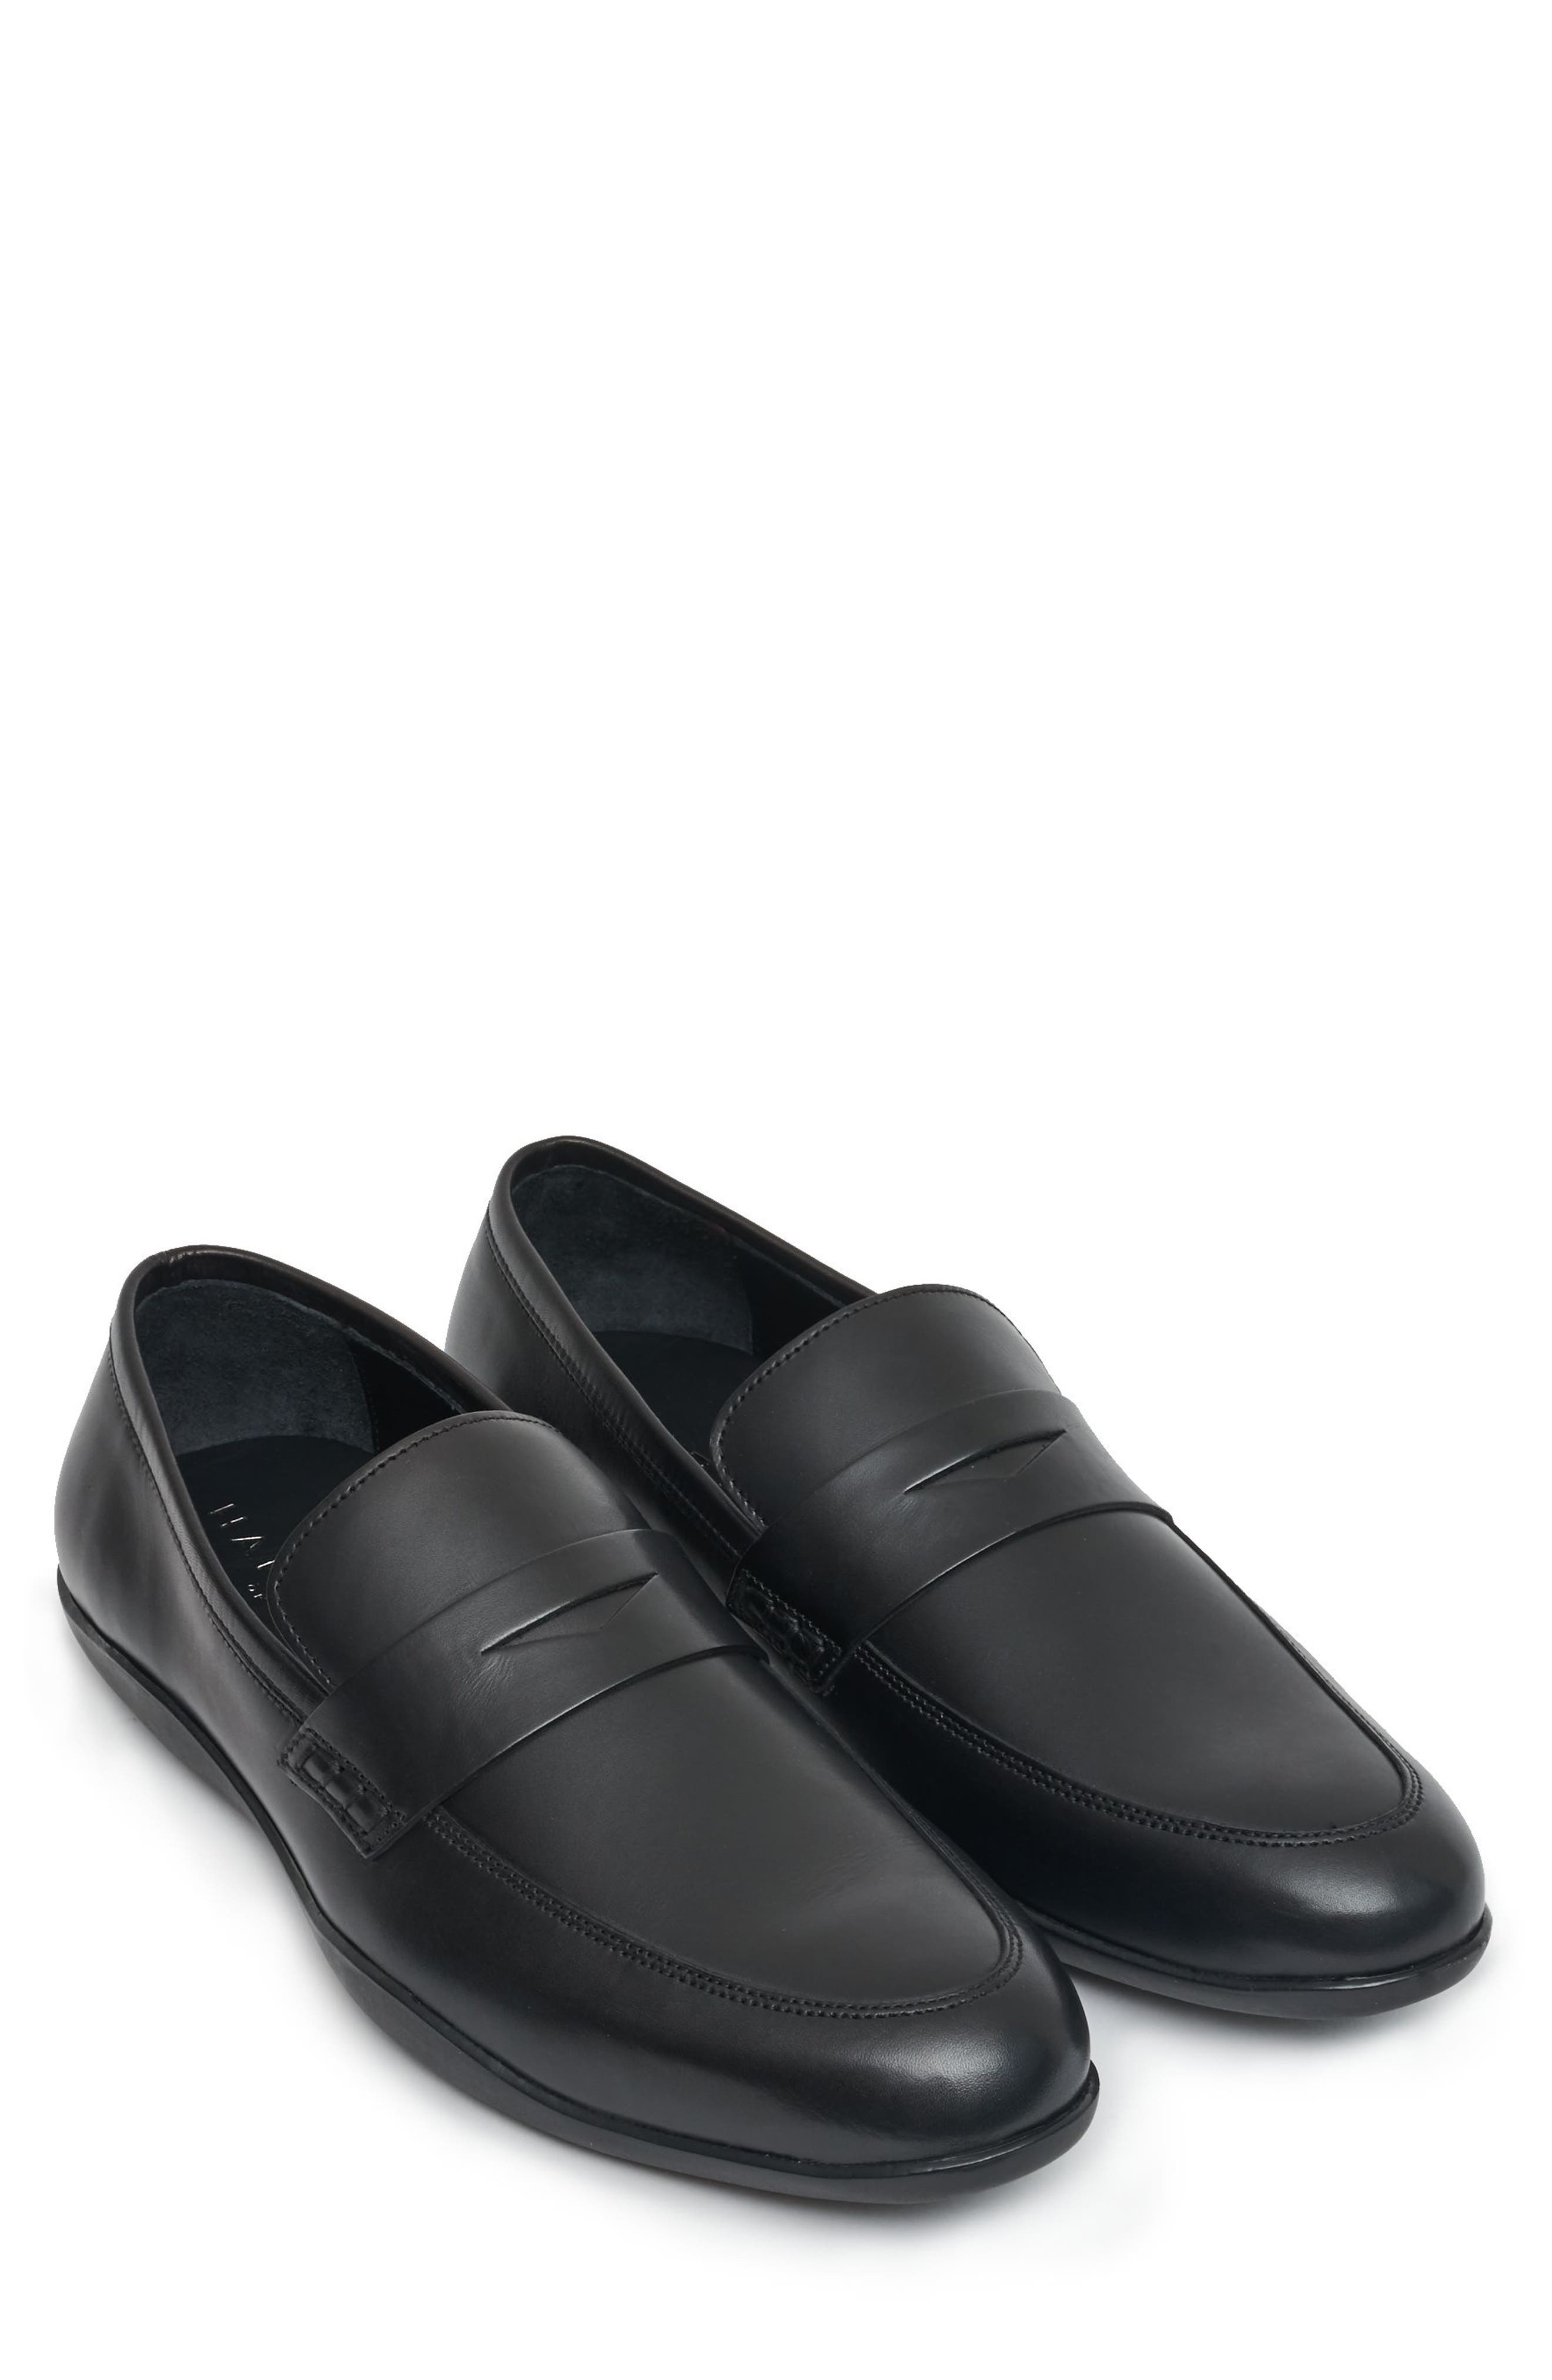 Harrys of London Downing Penny Loafer 